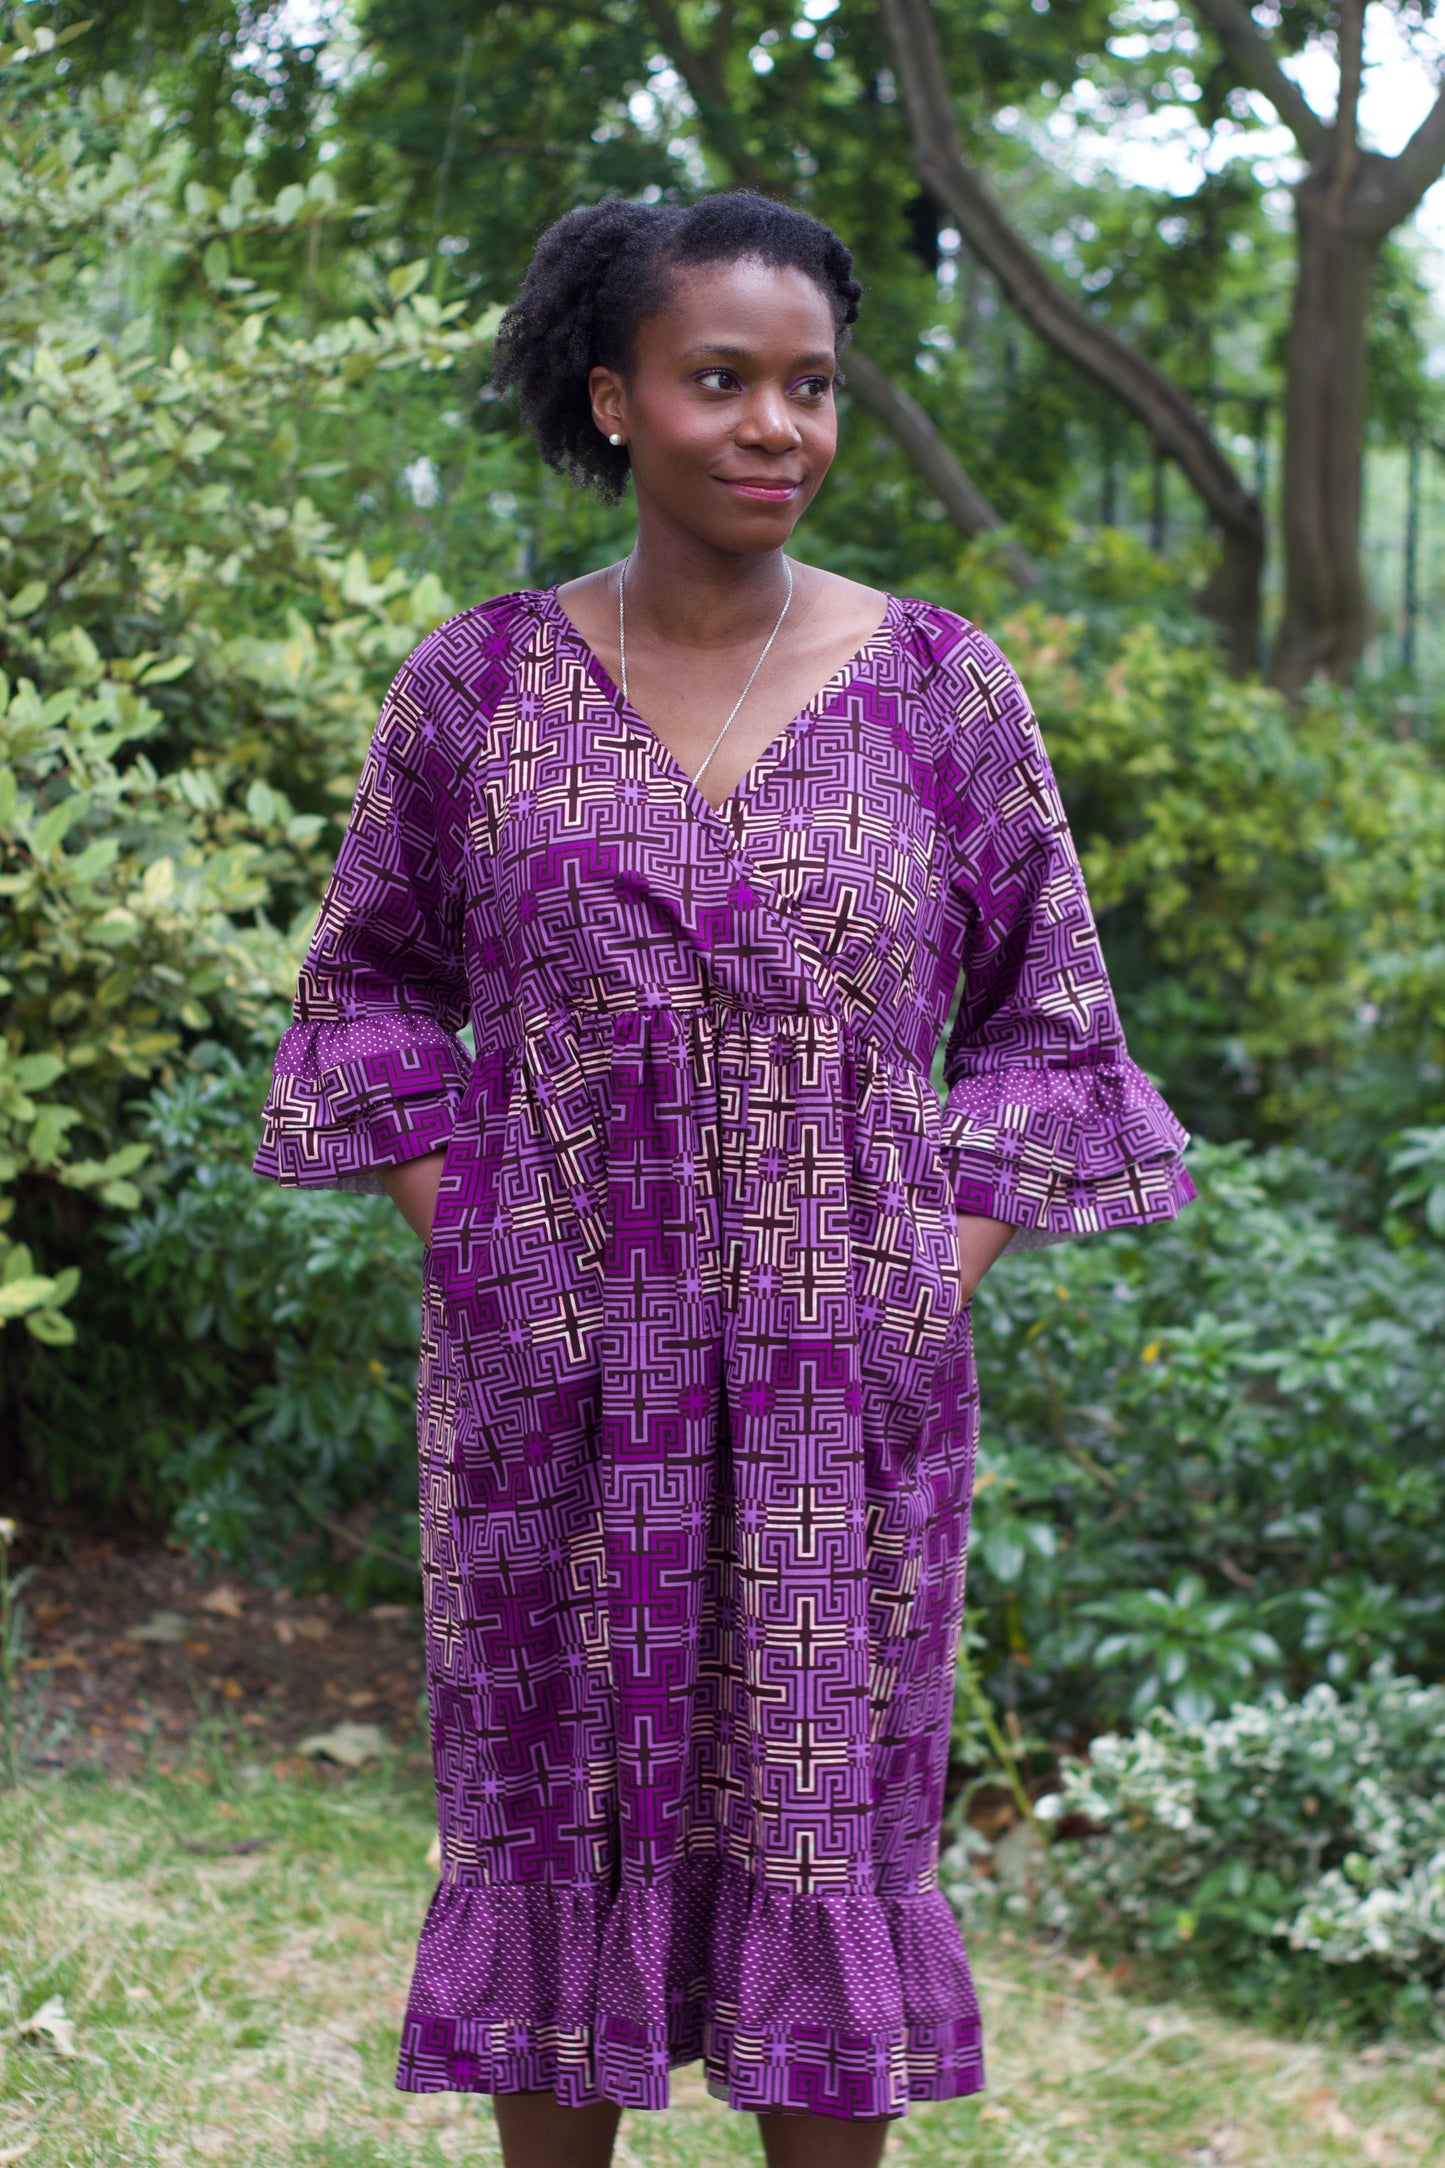 A woman wearing the purple Dawn African Print Ruffle Dress by Dovetailed London in a park setting, casually having placed hands in pockets, exuding comfortability.